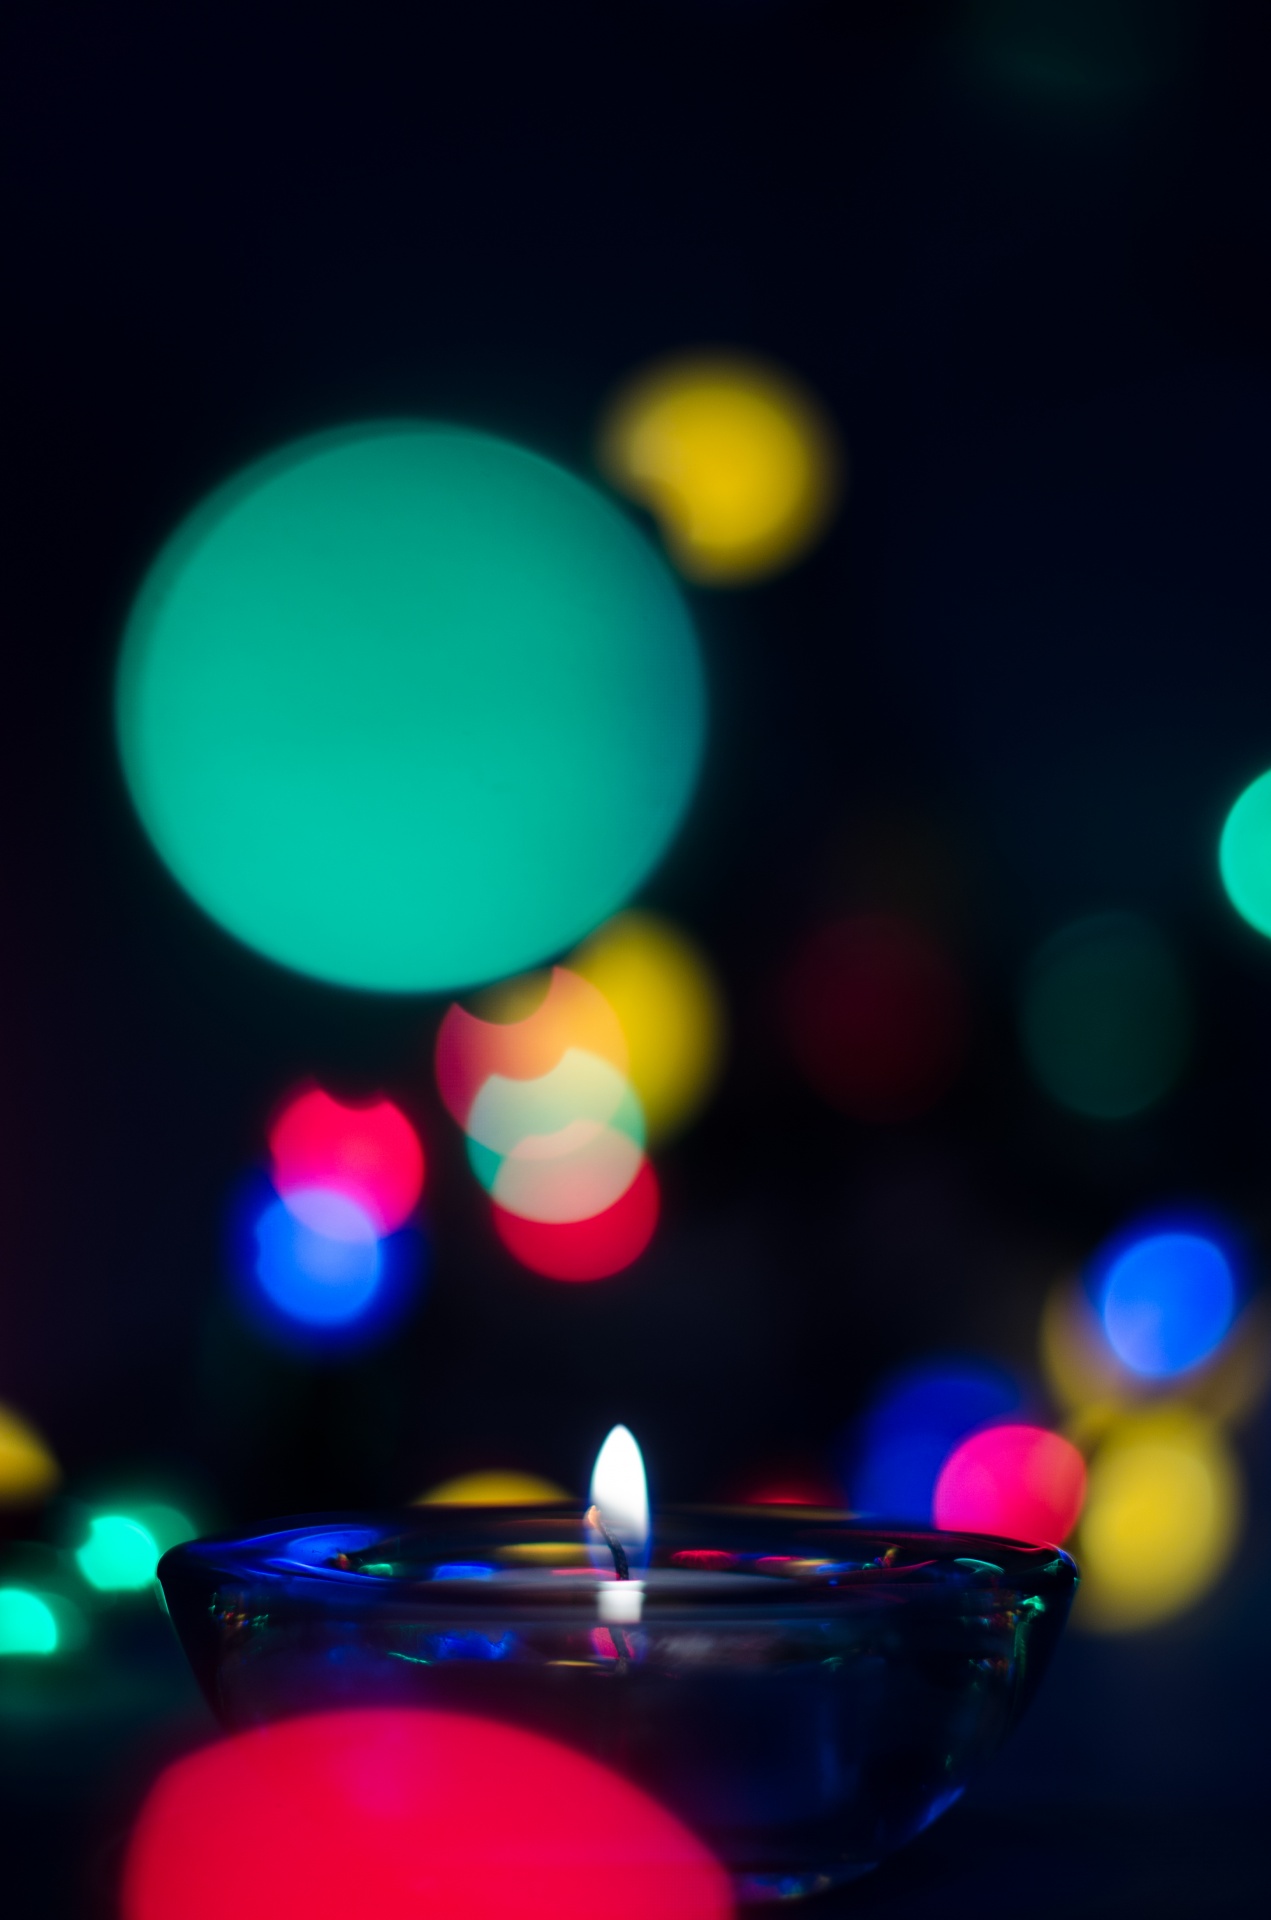 Vintage Shot For Candle With Bokeh Background